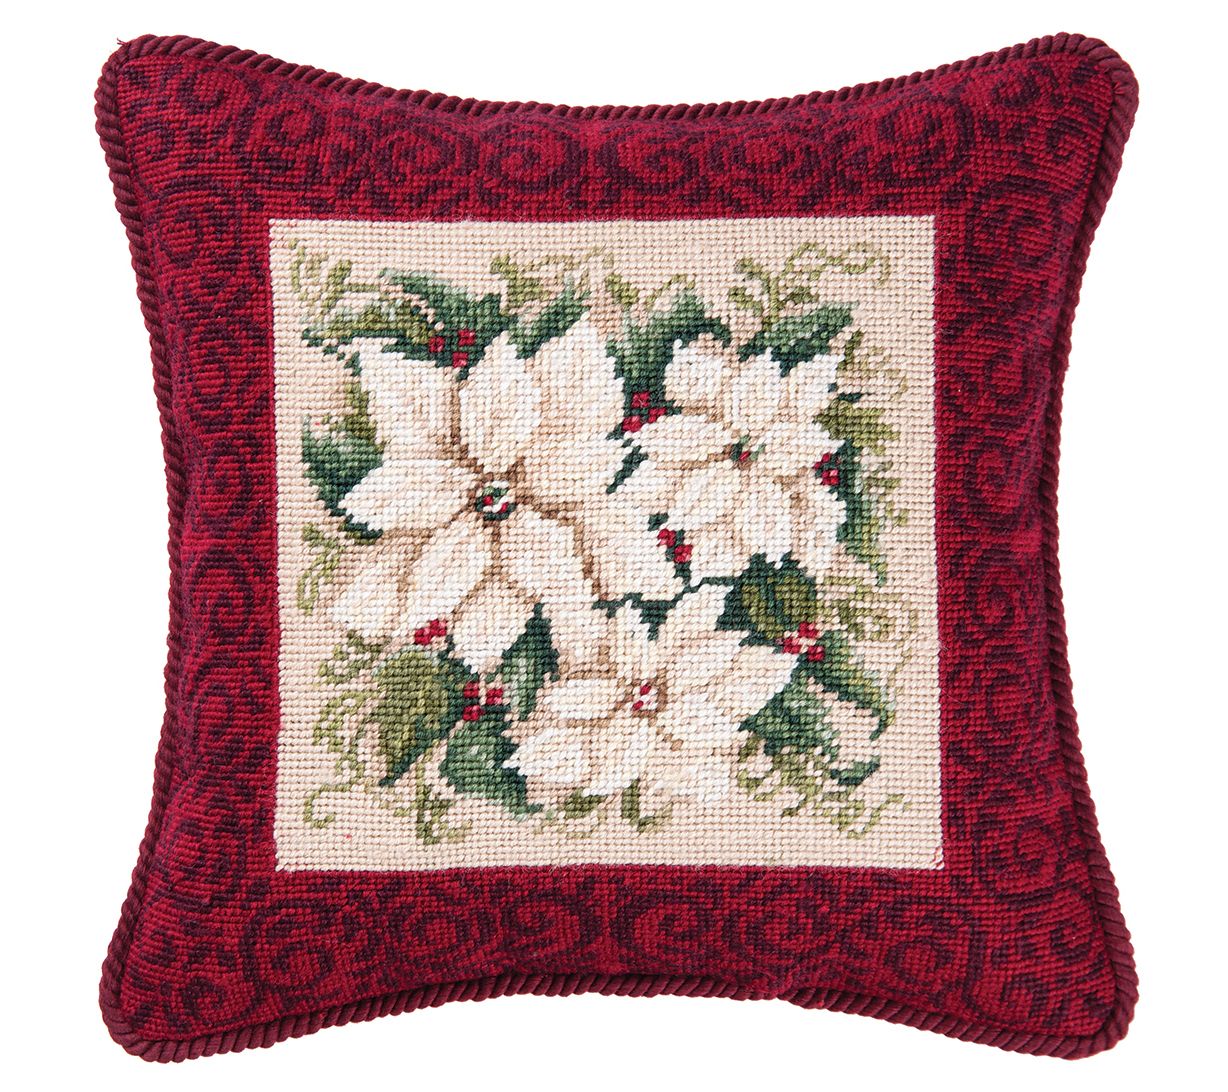 Lighted Embroidered Holiday Throw Pillows - Poinsettia